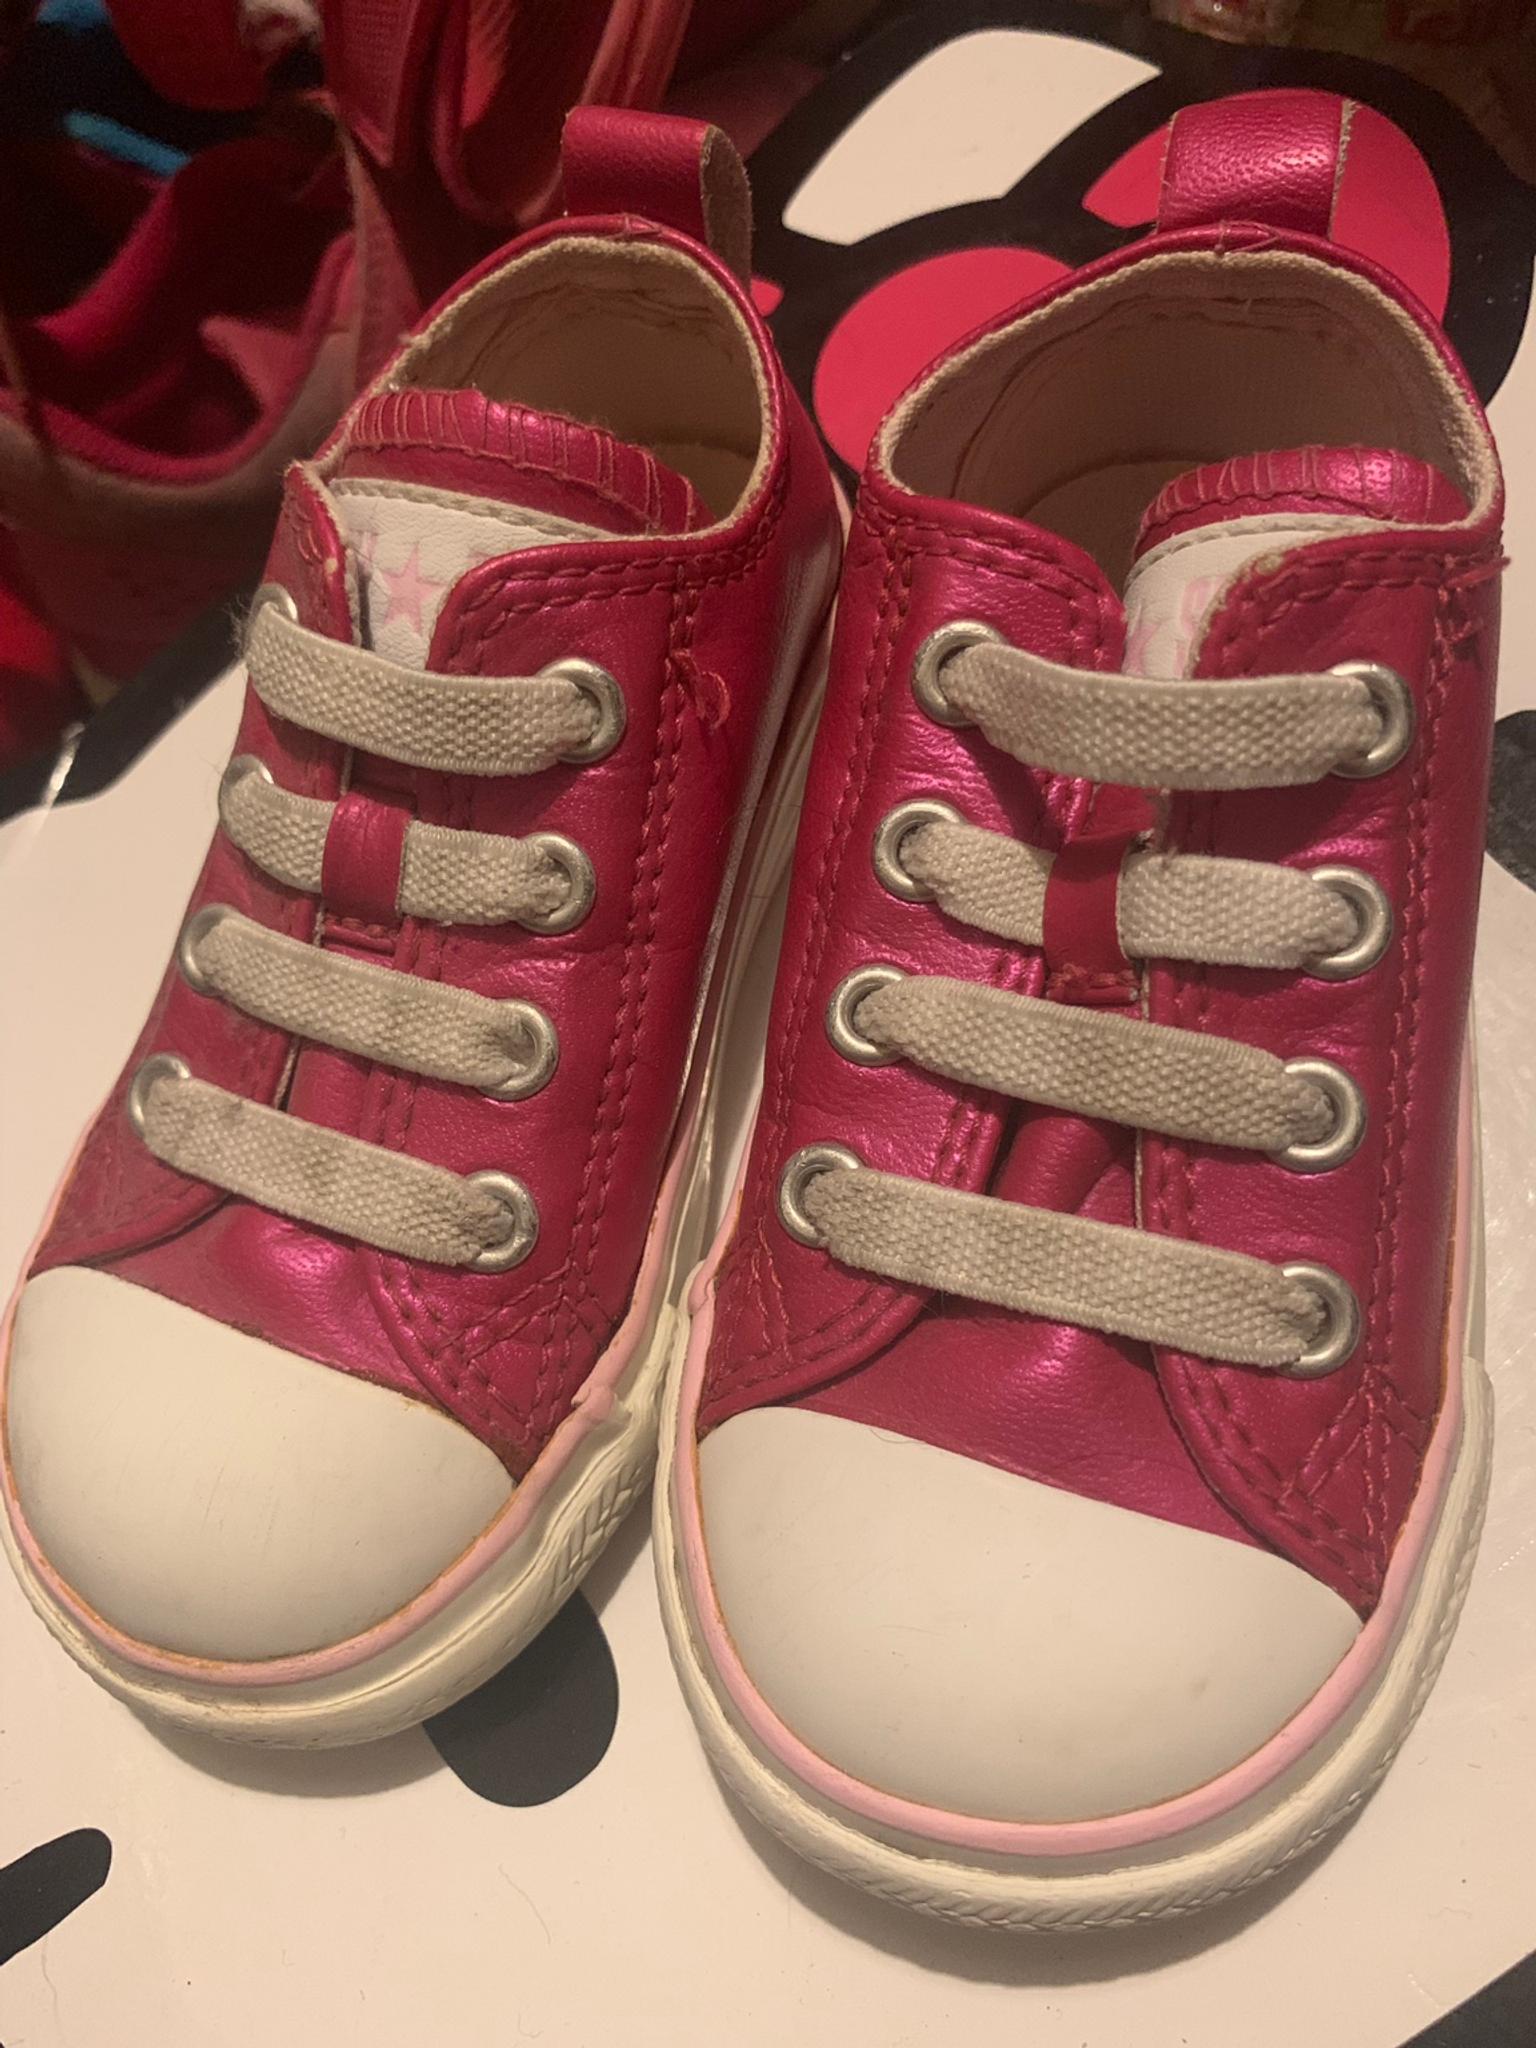 size 5 leather converse